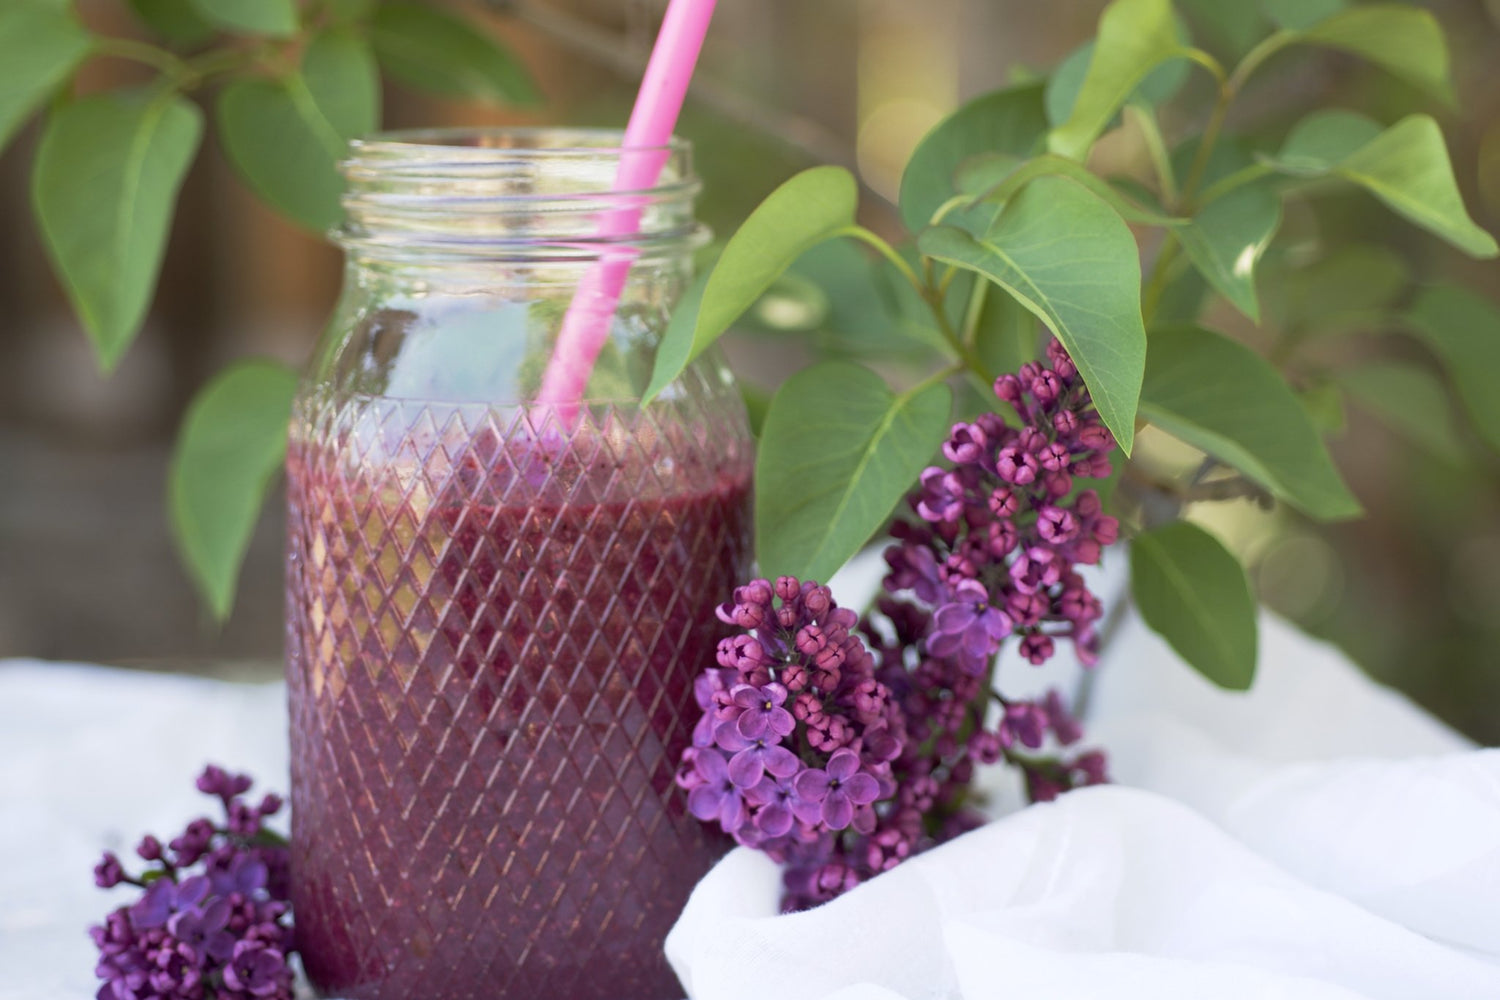 Try This Refreshing And Delicious Tea-Infused Smoothie To Fight Inflammation And Feel Better In Your Body - Loose Leaf Tea Market